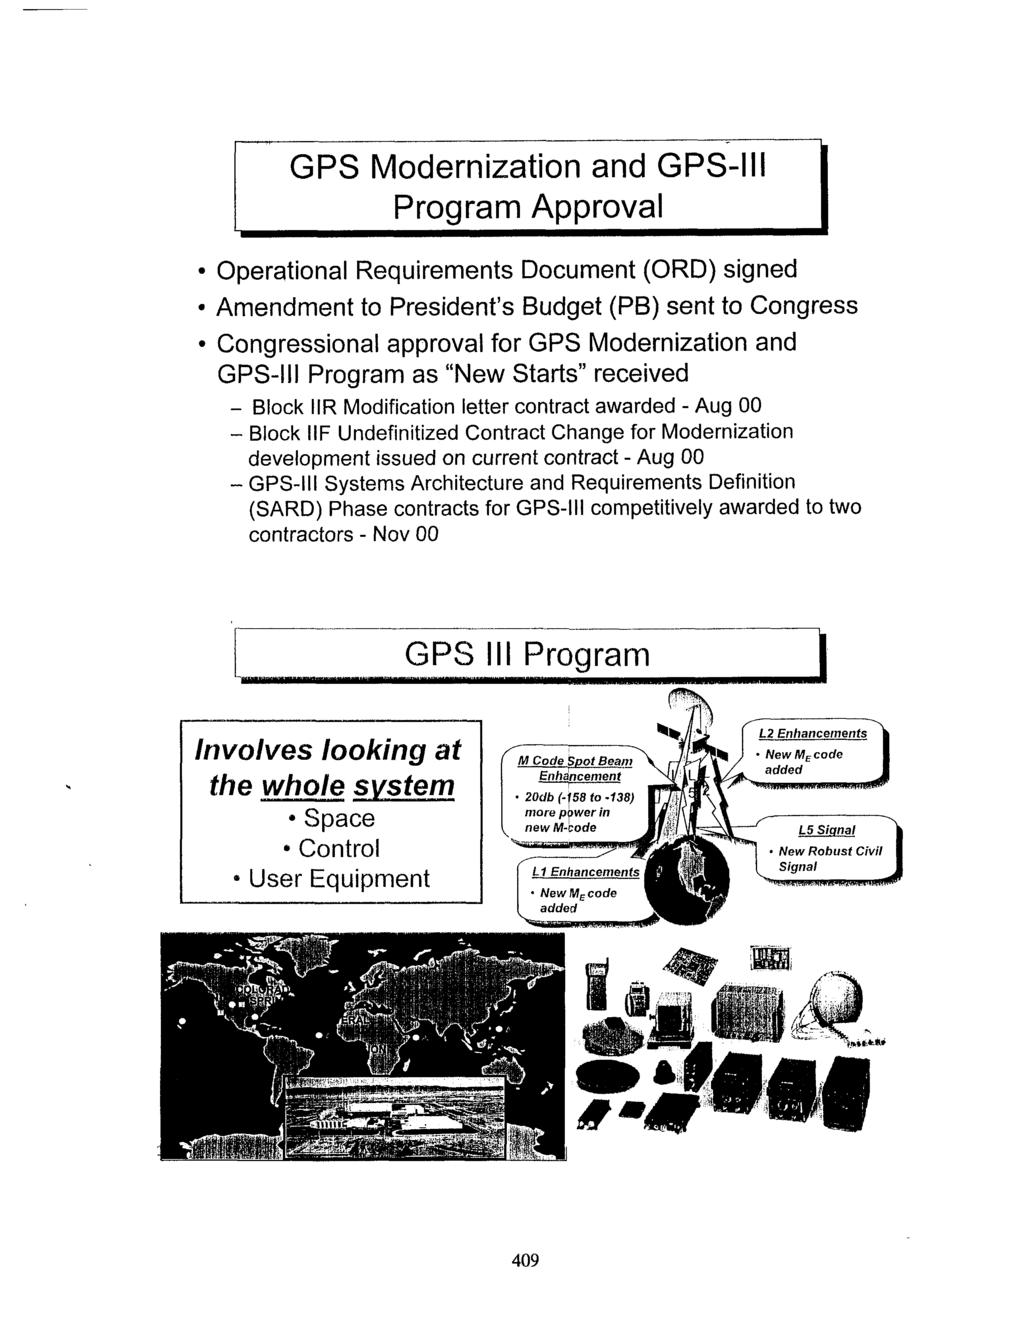 1 GPS Modernization and GPS- Program Approval Operational Requirements Document (ORD) signed Amendment to President s Budget (PB) sent to Congress Congressional approval for GPS Modernization and